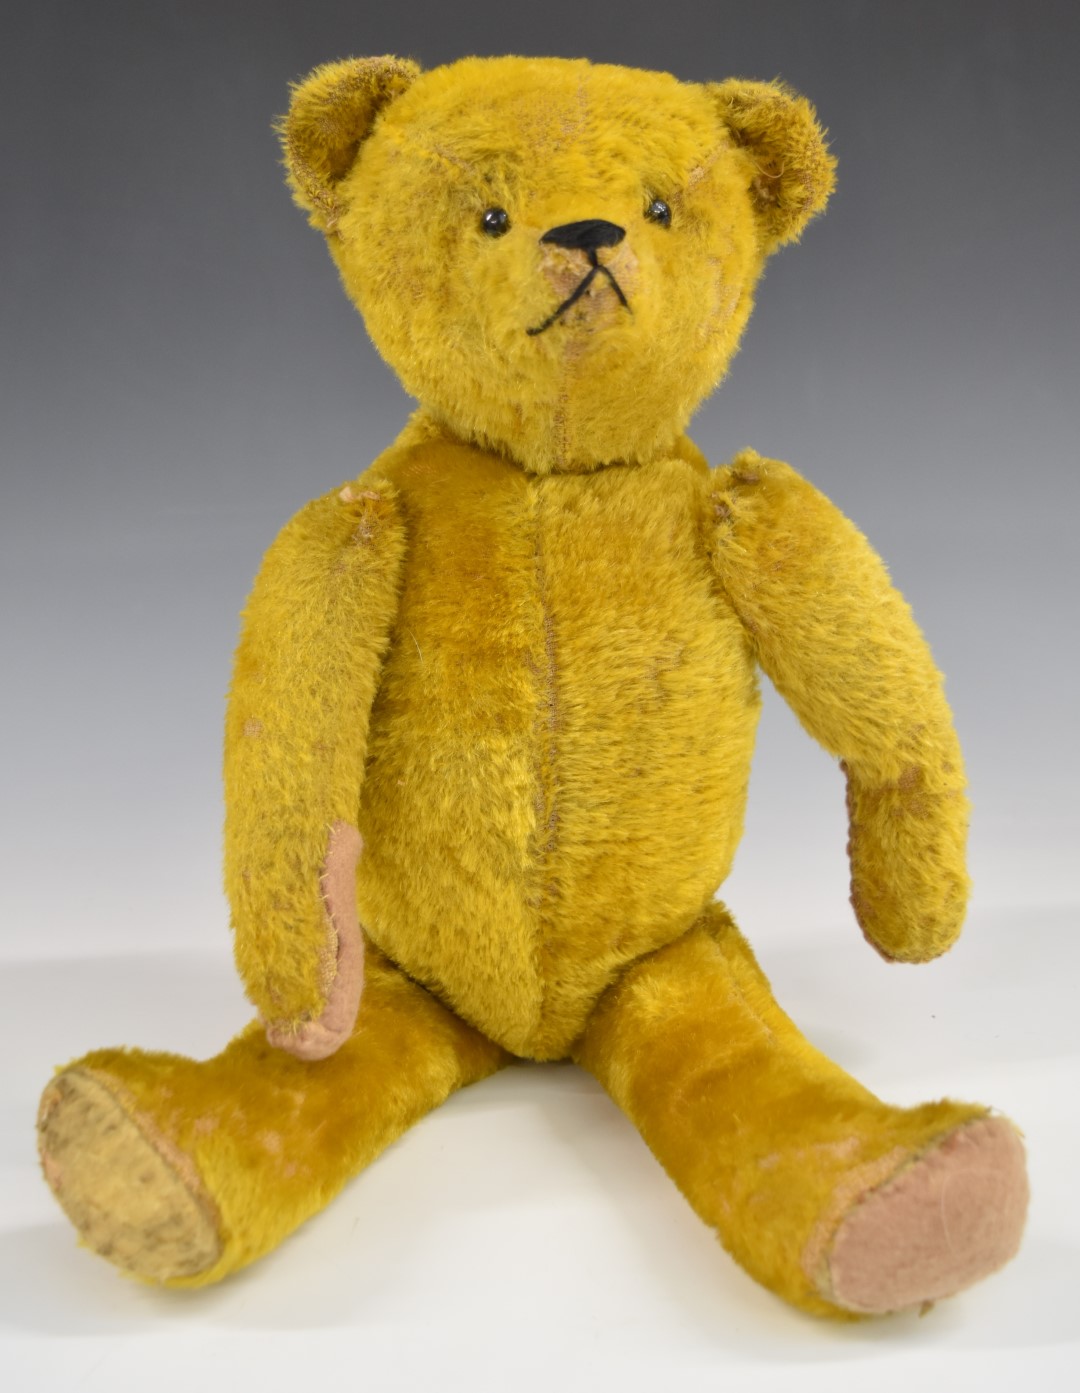 American Teddy bear with golden mohair, straw filling, disc joints, felt pads and stitched features,